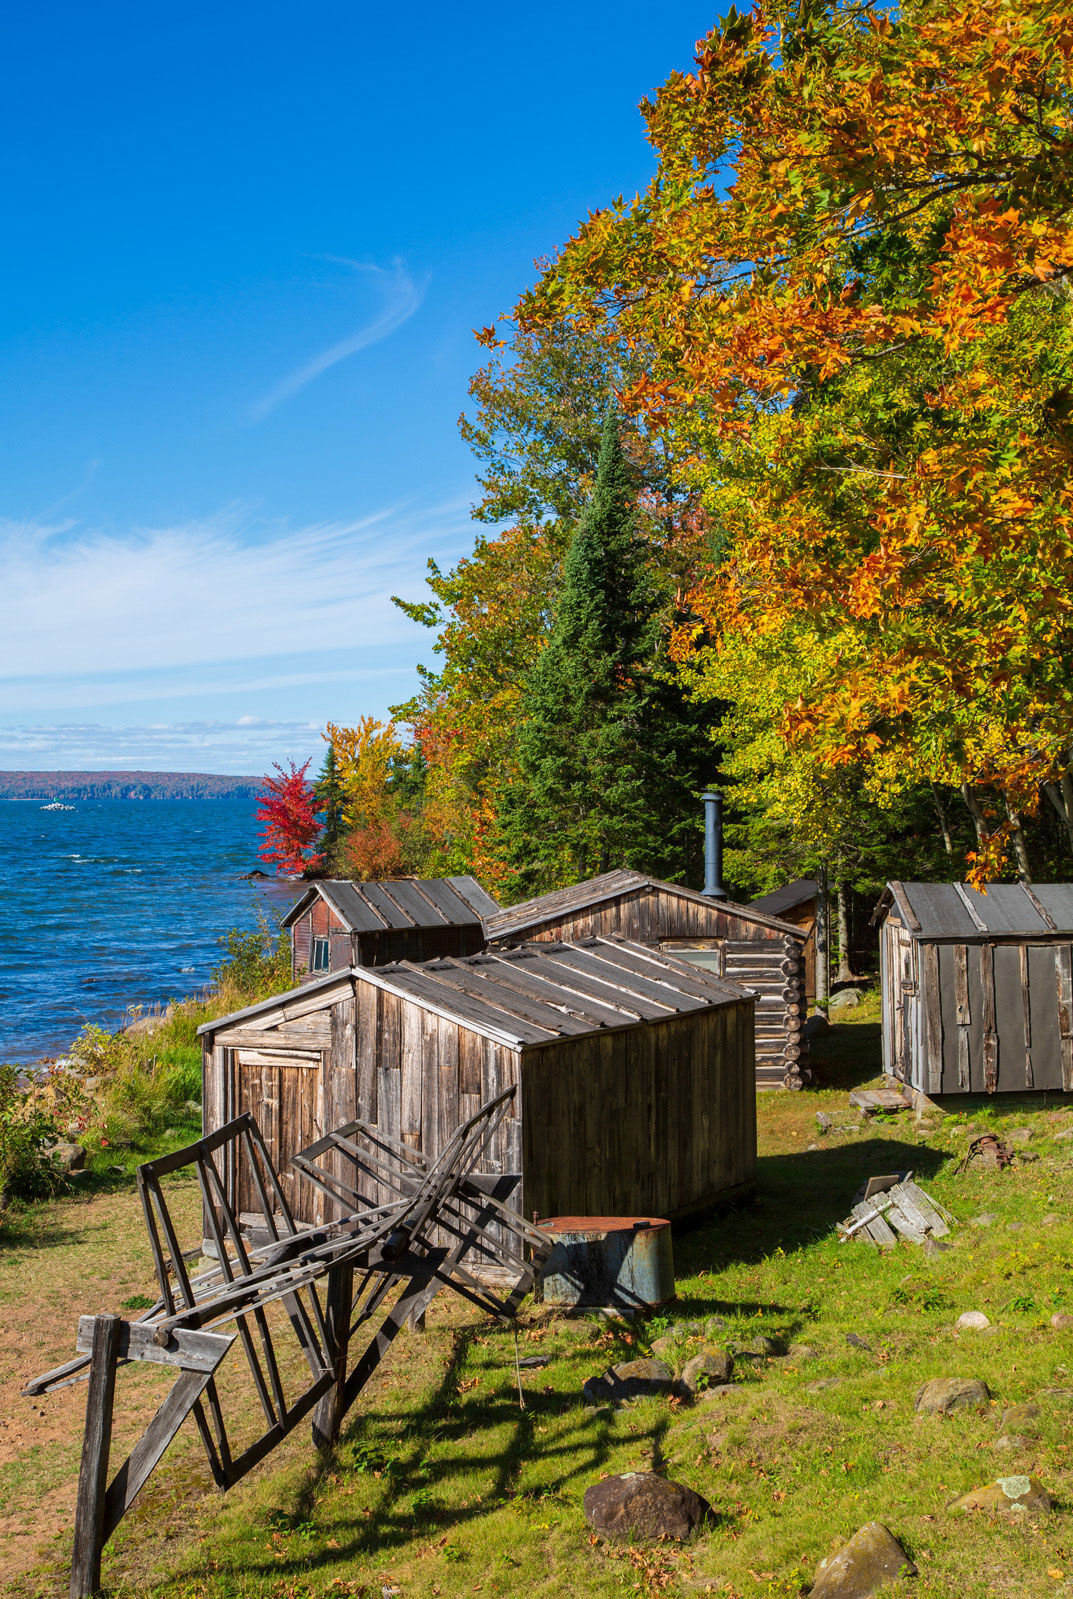 Fall colors at the manitou island fish camp in the apostle islands near bayfield wisconsin